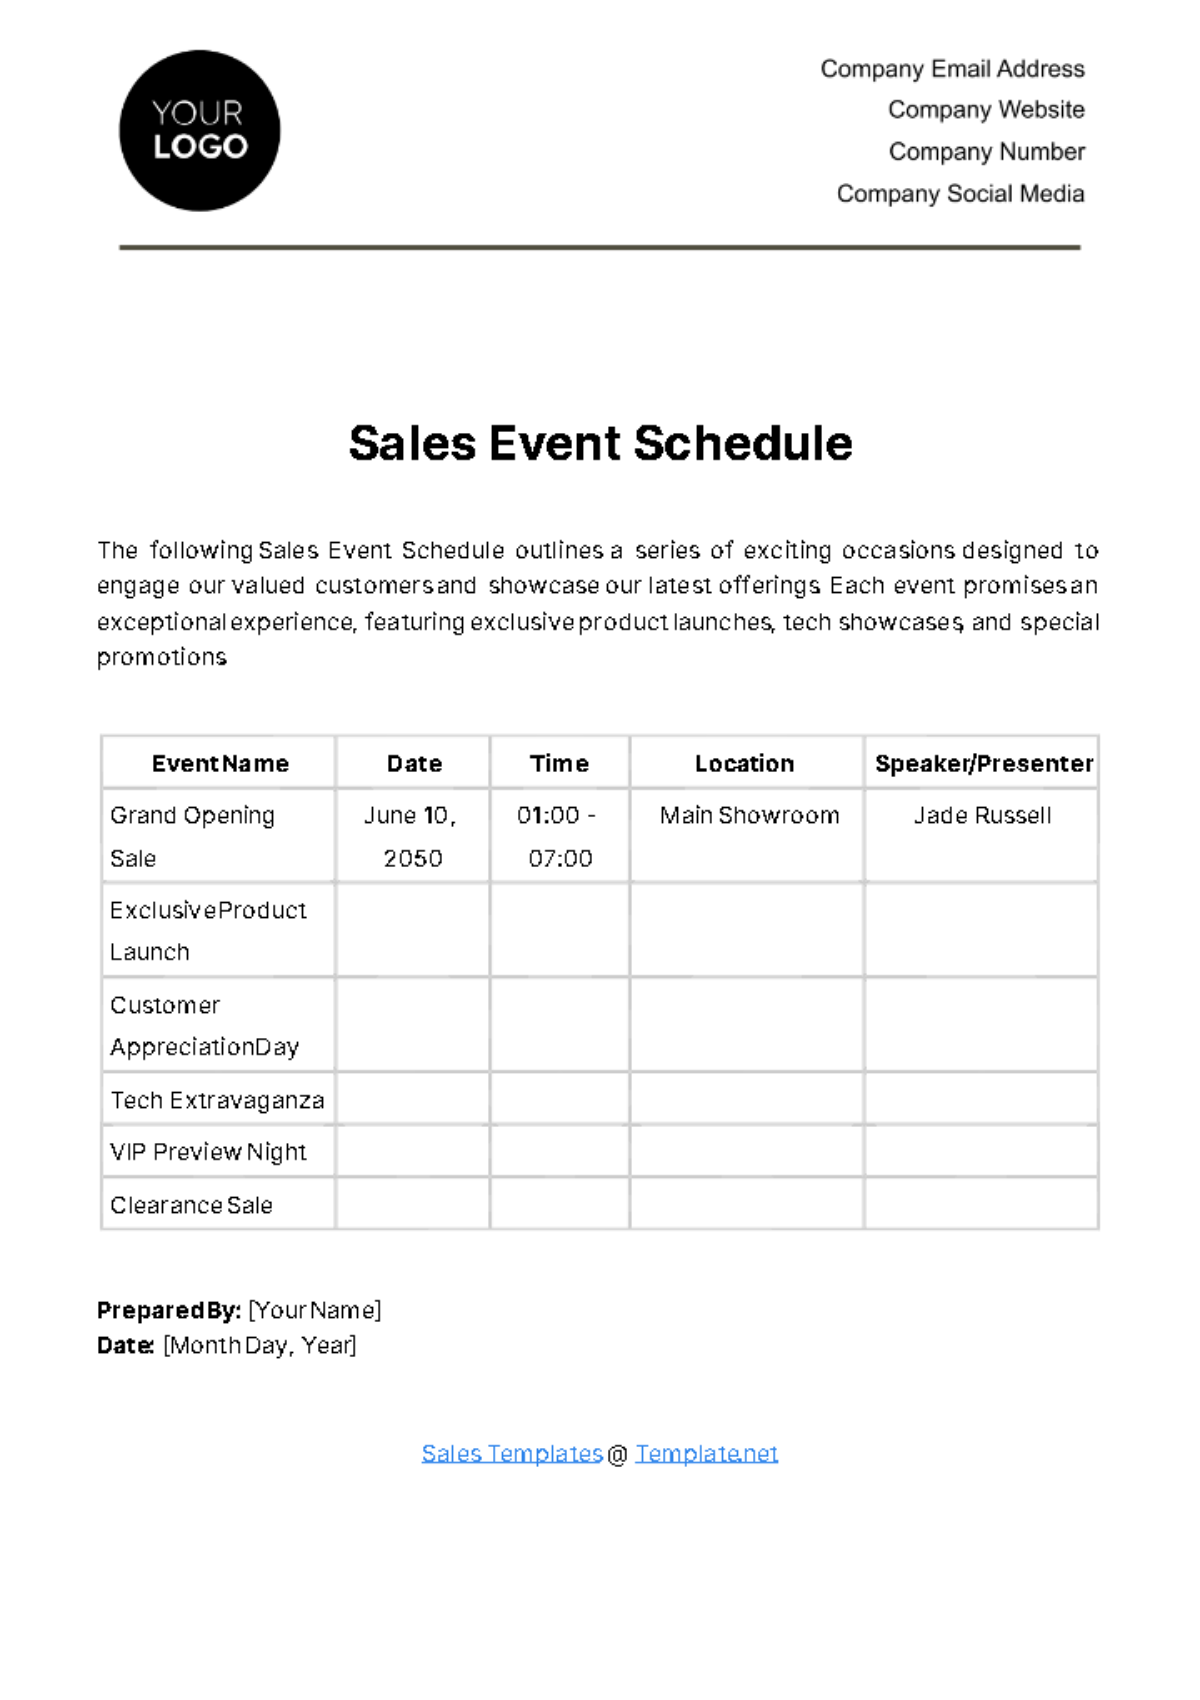 Free Sales Event Schedule Template